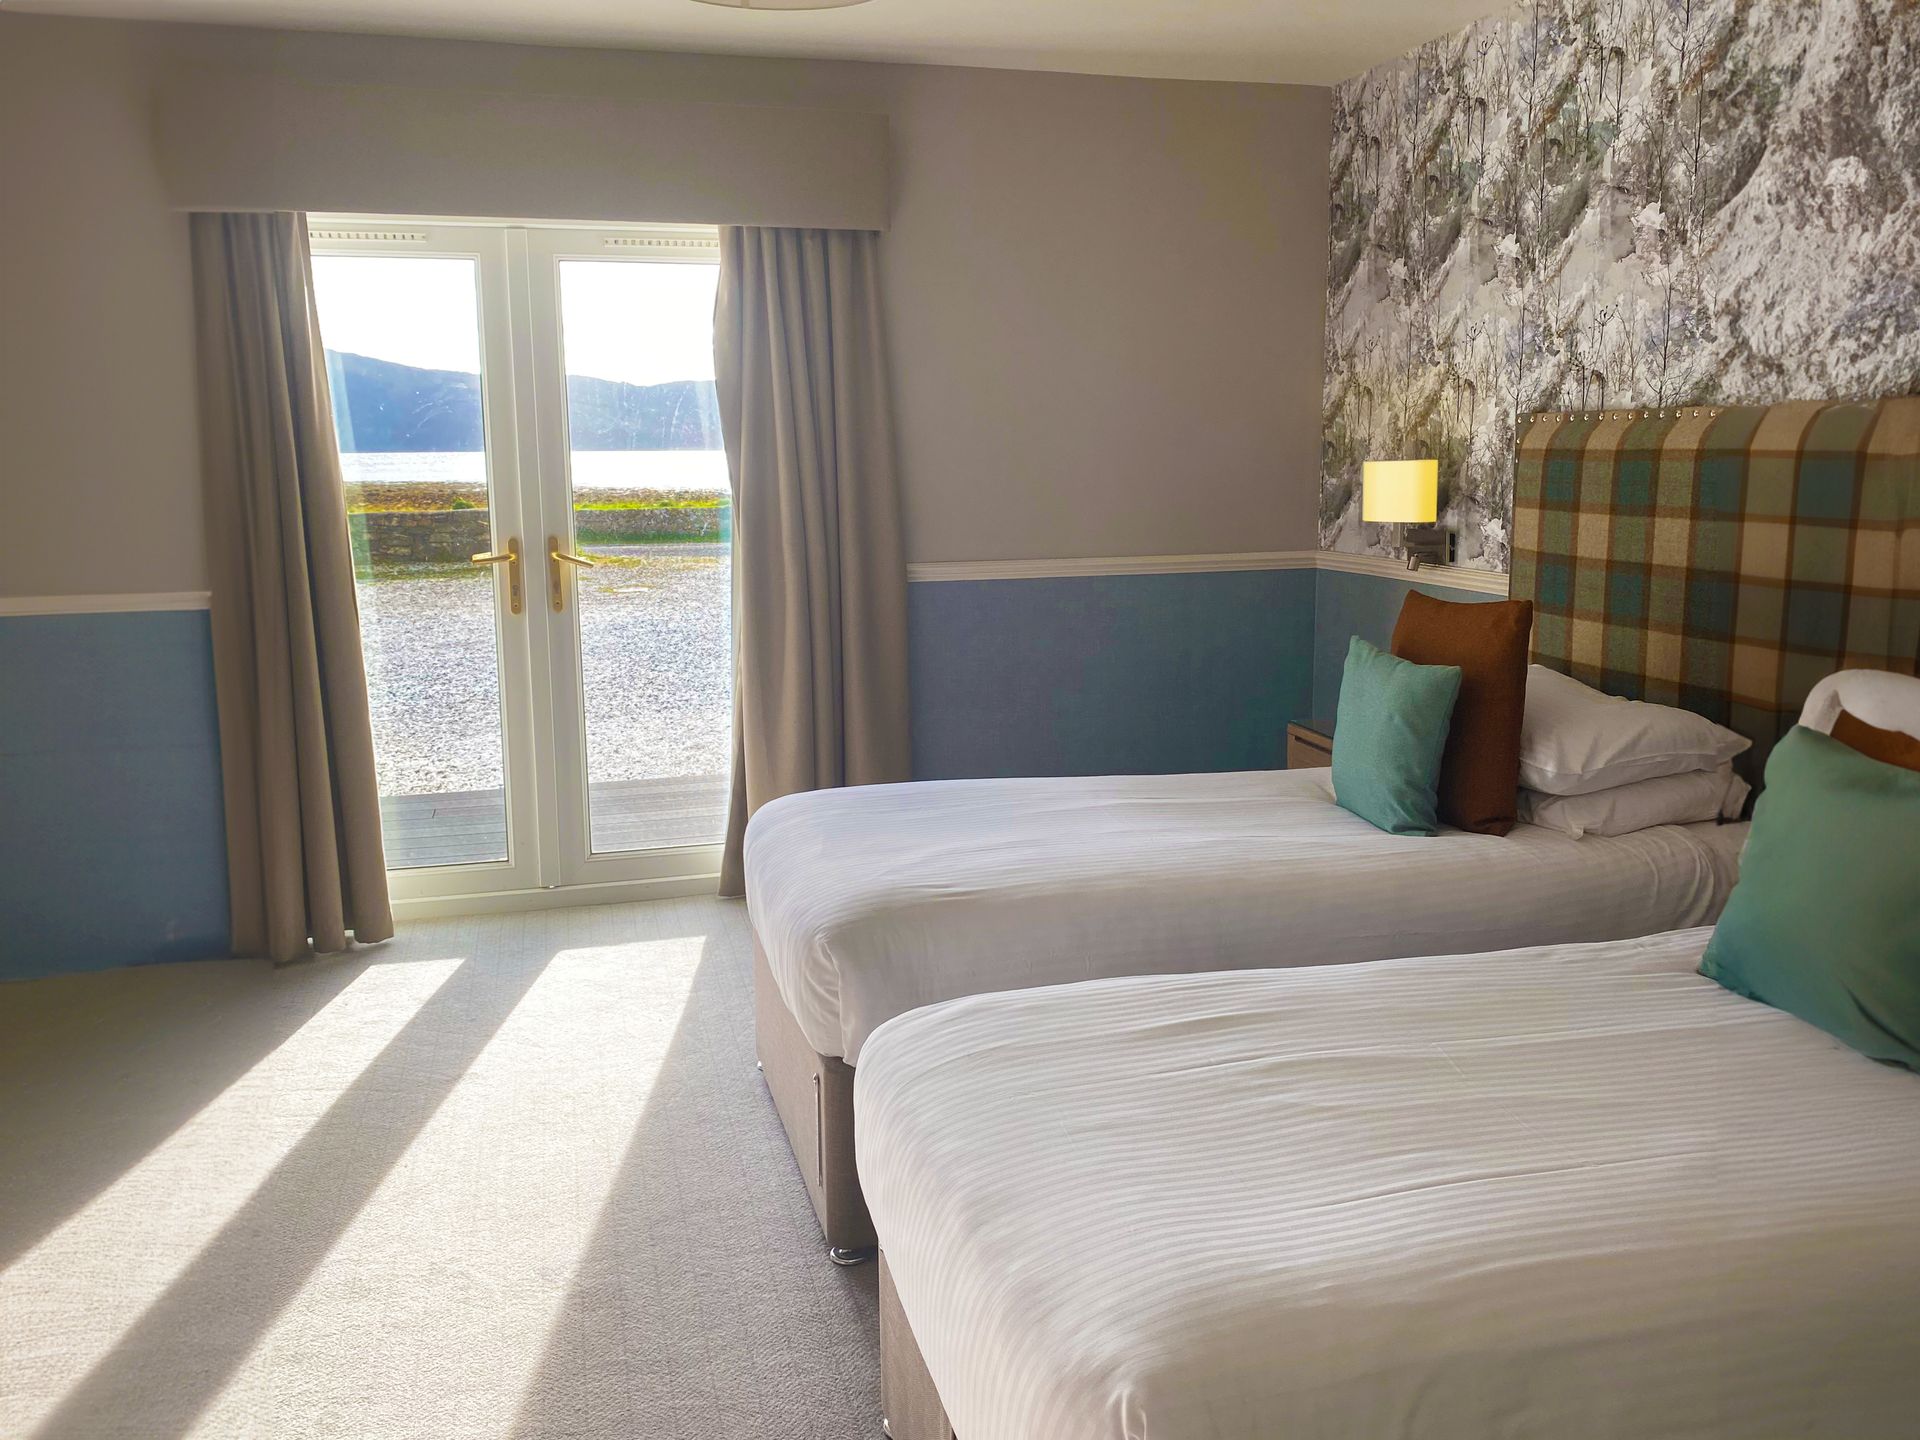 Deluxe double or twin sea view at Balmacara Hotel at the Highlands in Scotland